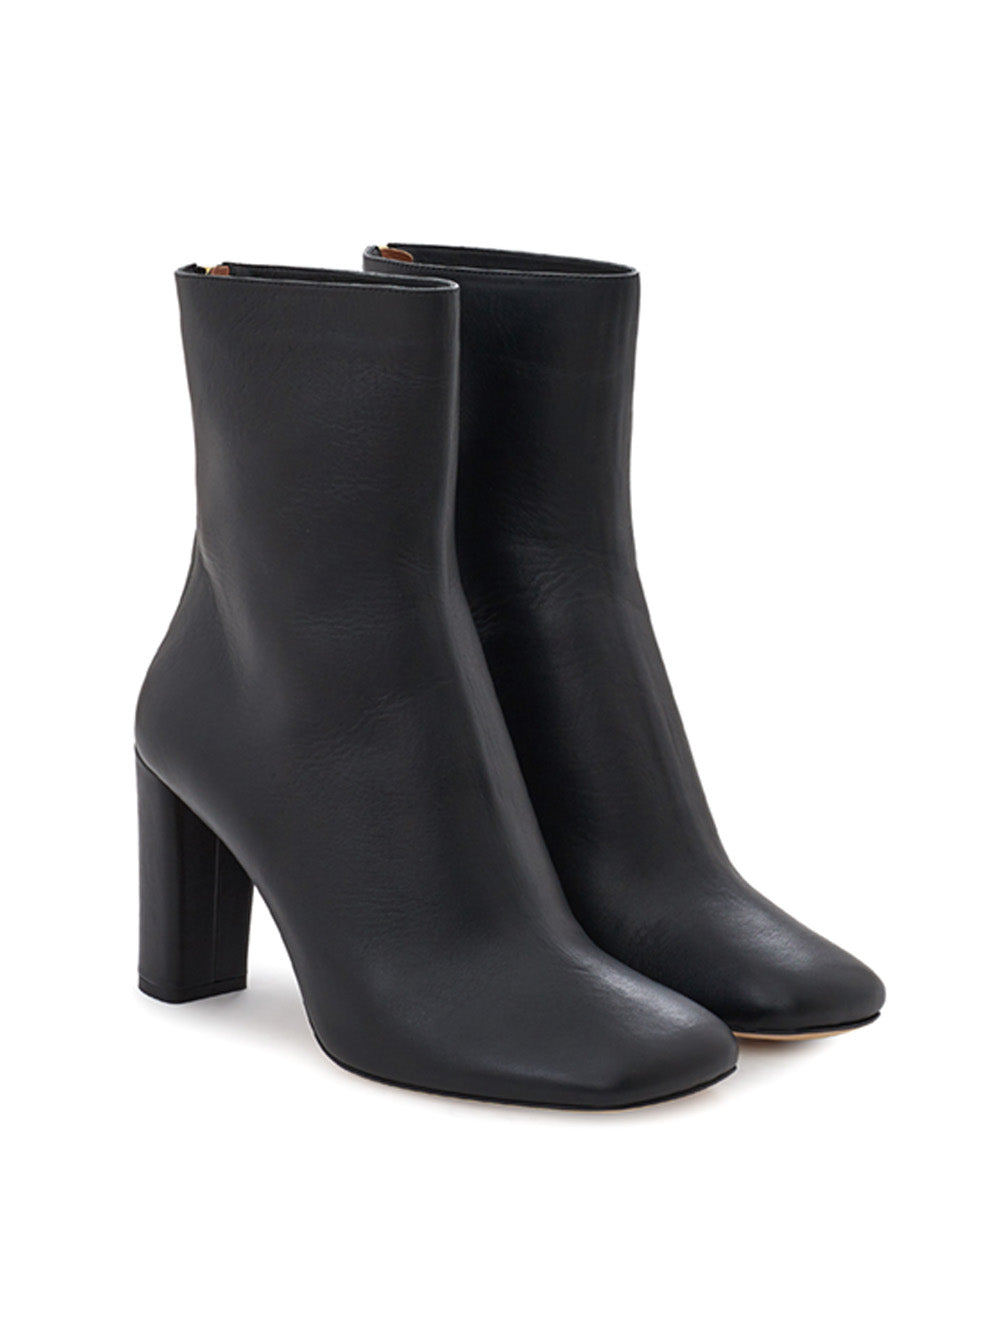 Black ankle boot with zip Paris Texas